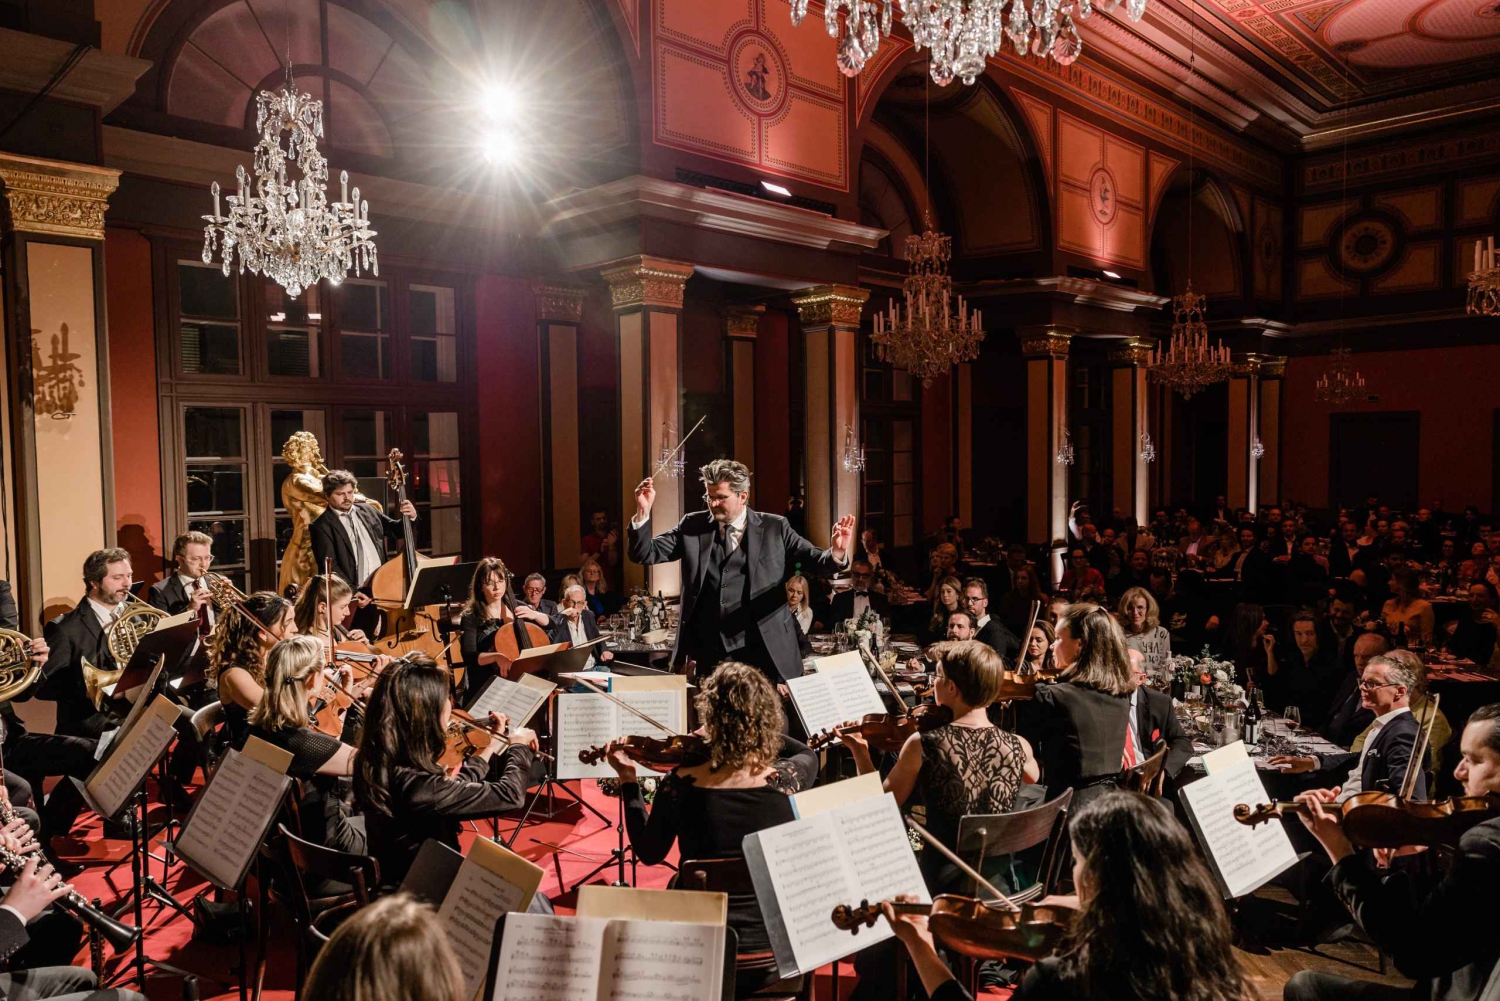 House of Strauss: Concert Show including Museum (Category B)